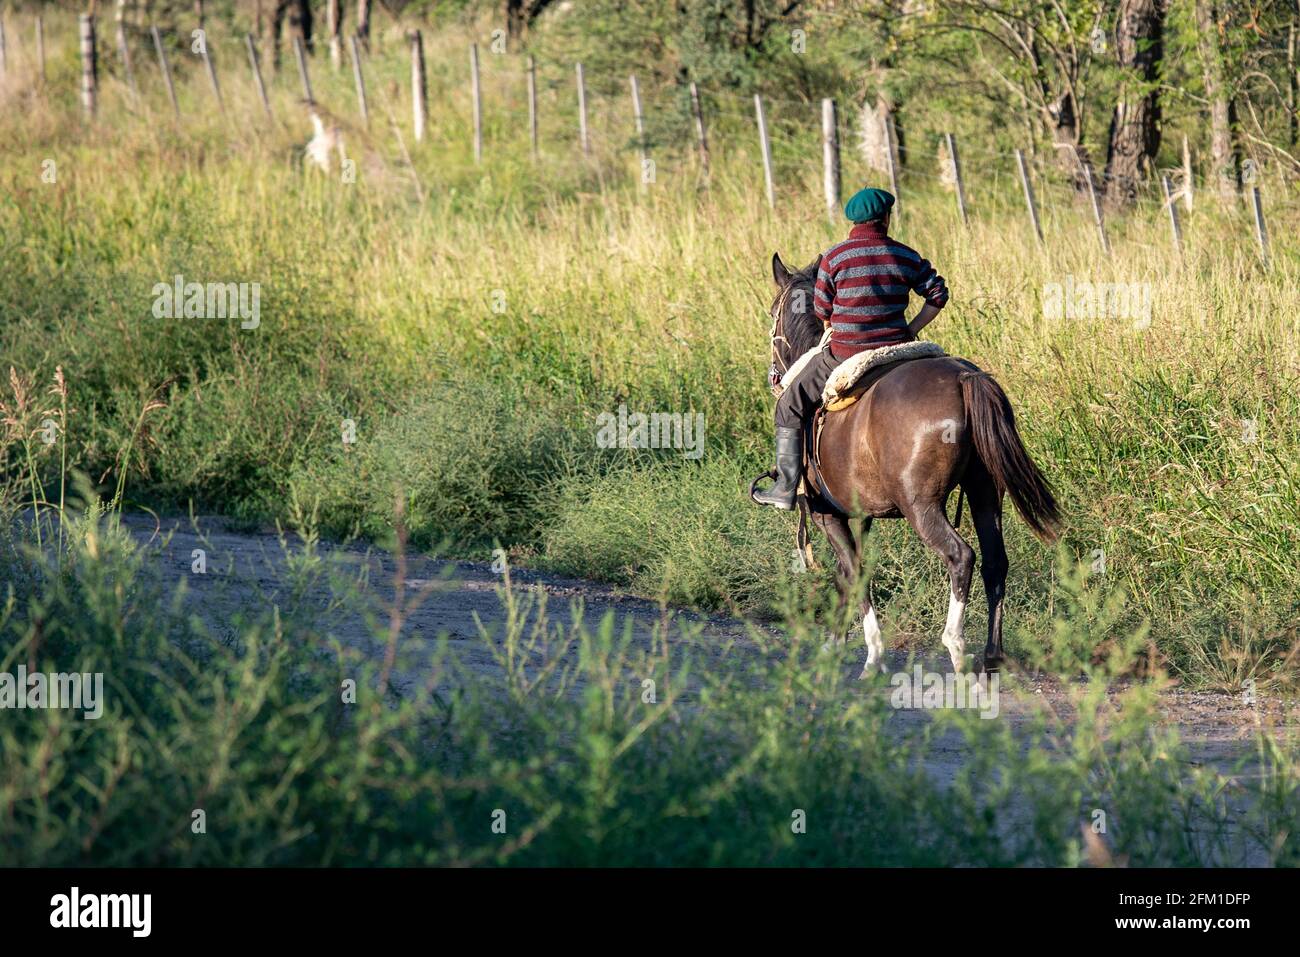 Street photography, with the sunset, trees, river, lots of green, and man on horseback. Stock Photo